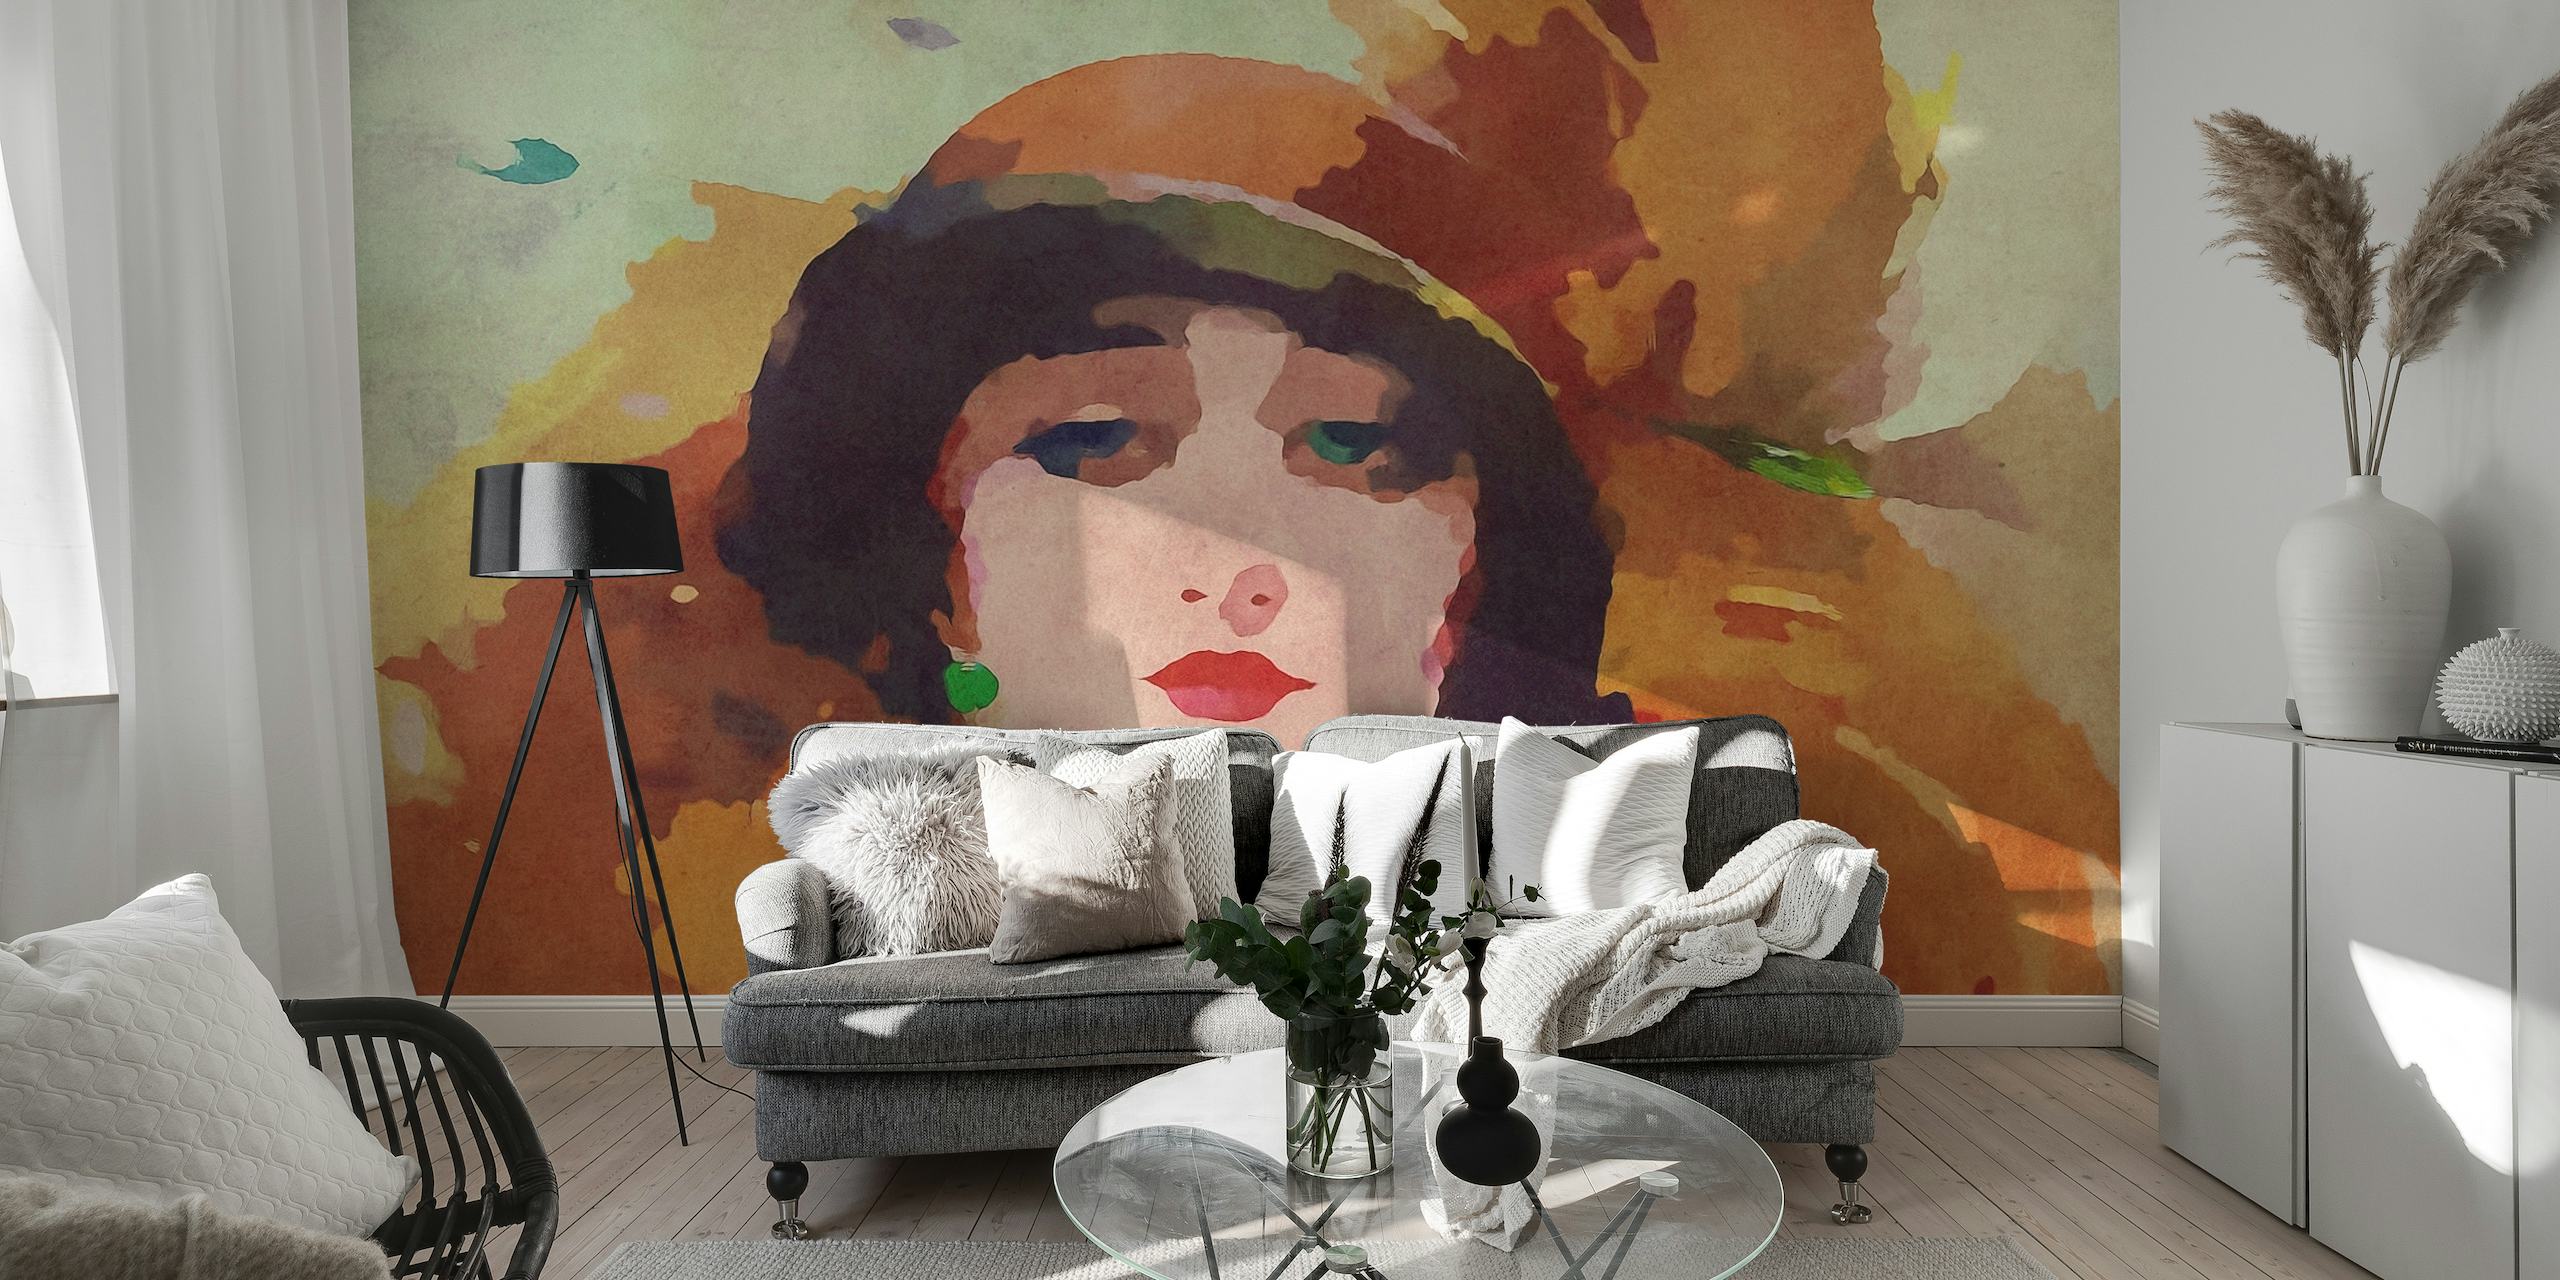 Vintage-style wall mural of a 1920s flapper girl with warm, autumnal colors